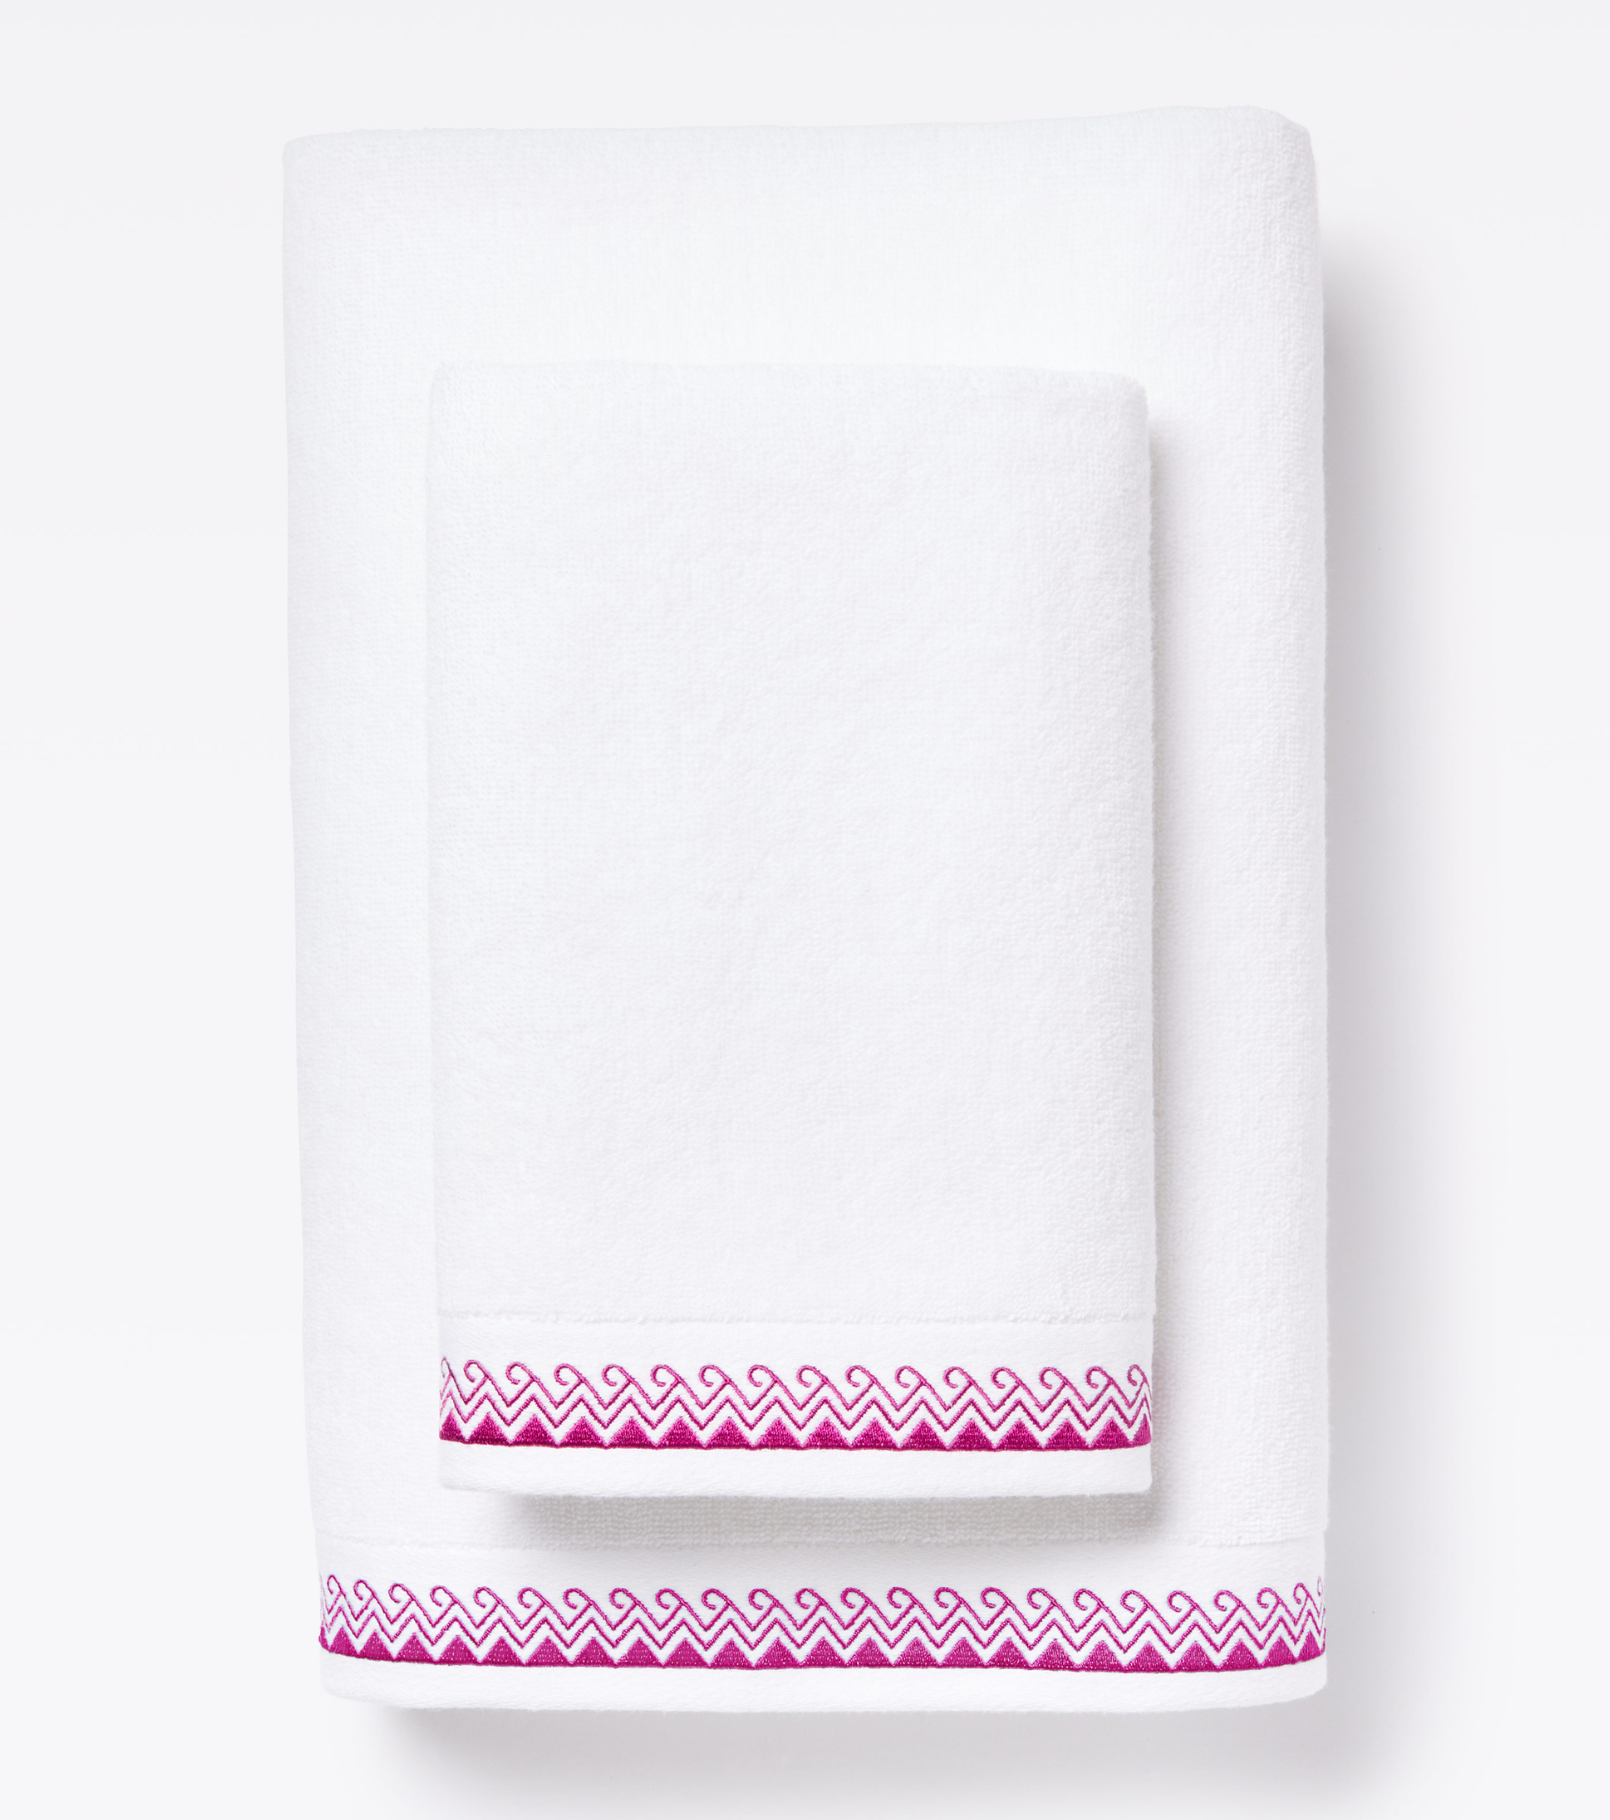 Averylily Wind + Wave Bath and Hand Towels in White with Orchid Pink trim, made from 600-gram weight pure Aegean cotton.